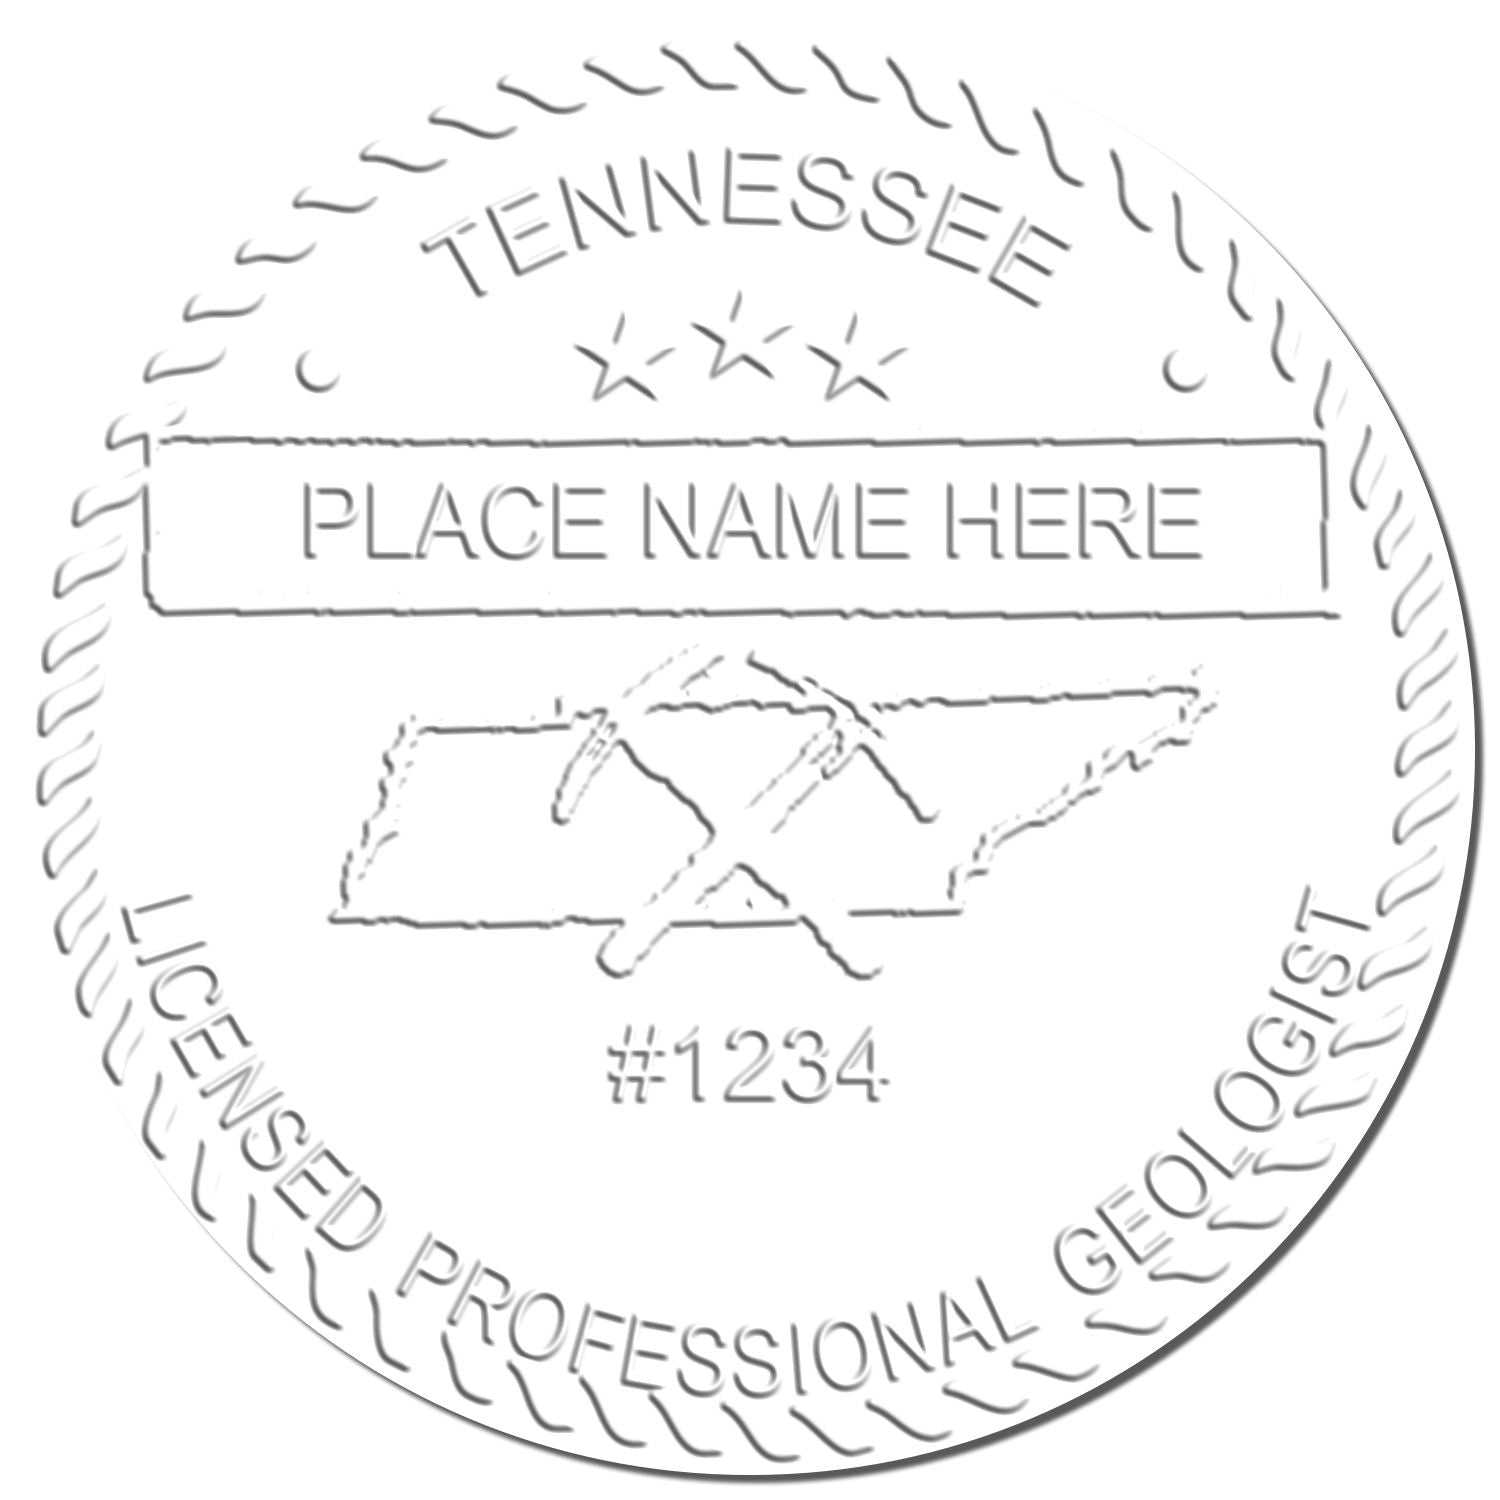 The main image for the Tennessee Geologist Desk Seal depicting a sample of the imprint and imprint sample